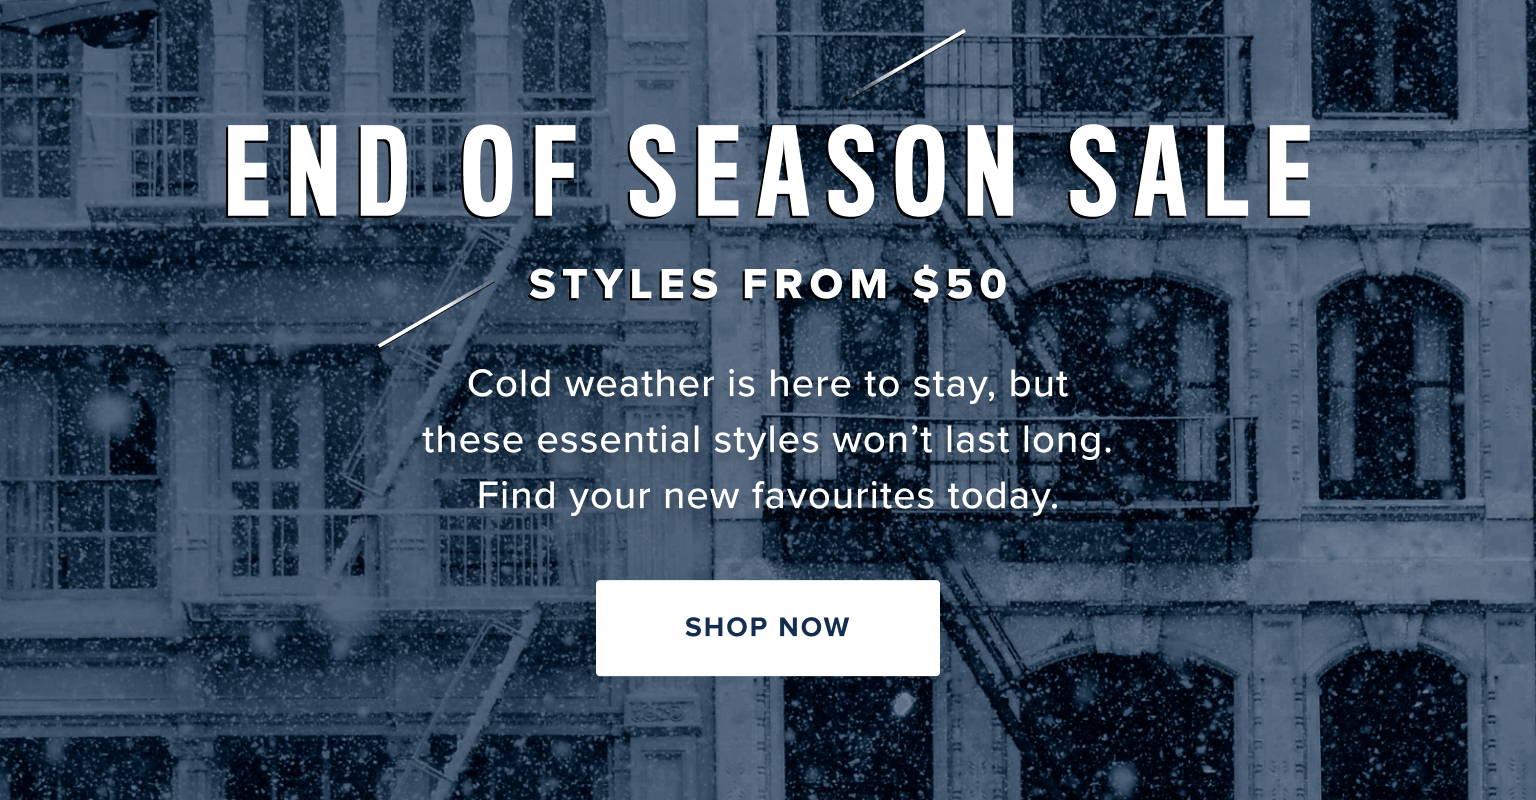 End of season sale. Styles from $50 